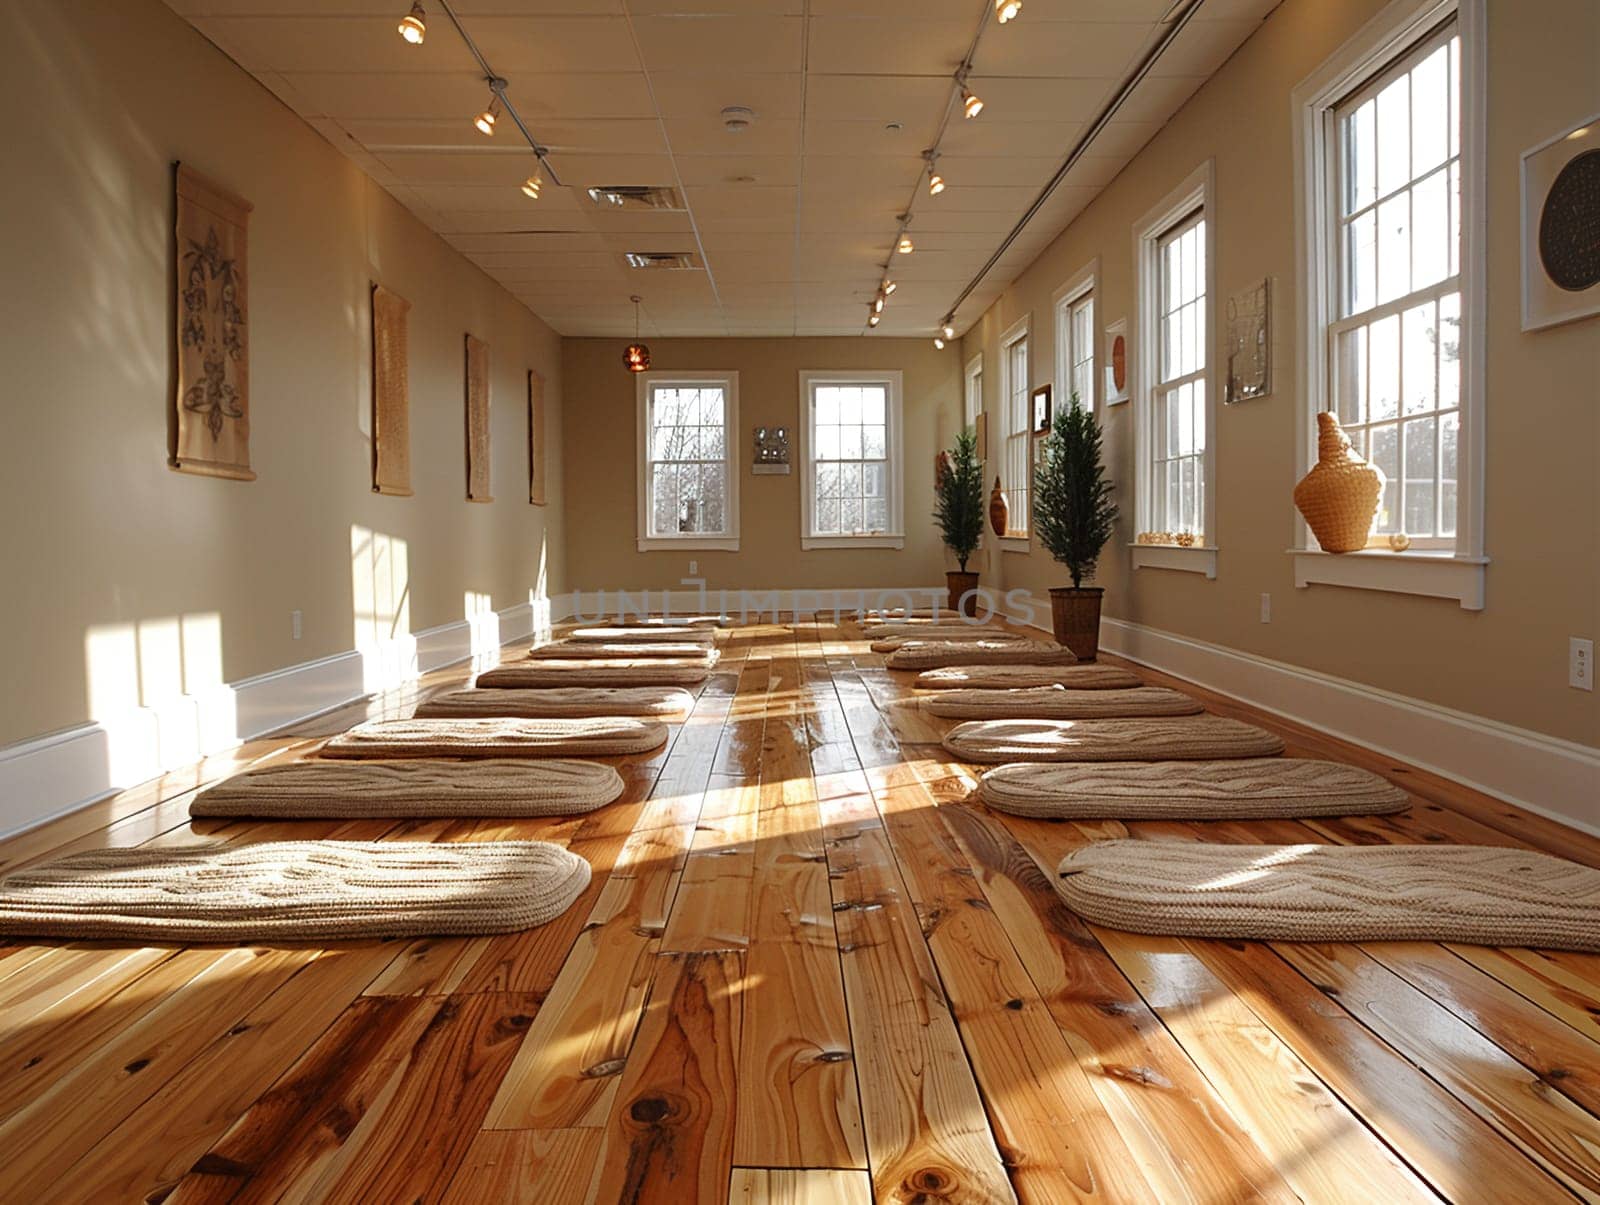 Peaceful yoga studio with natural wood floors and calming colors